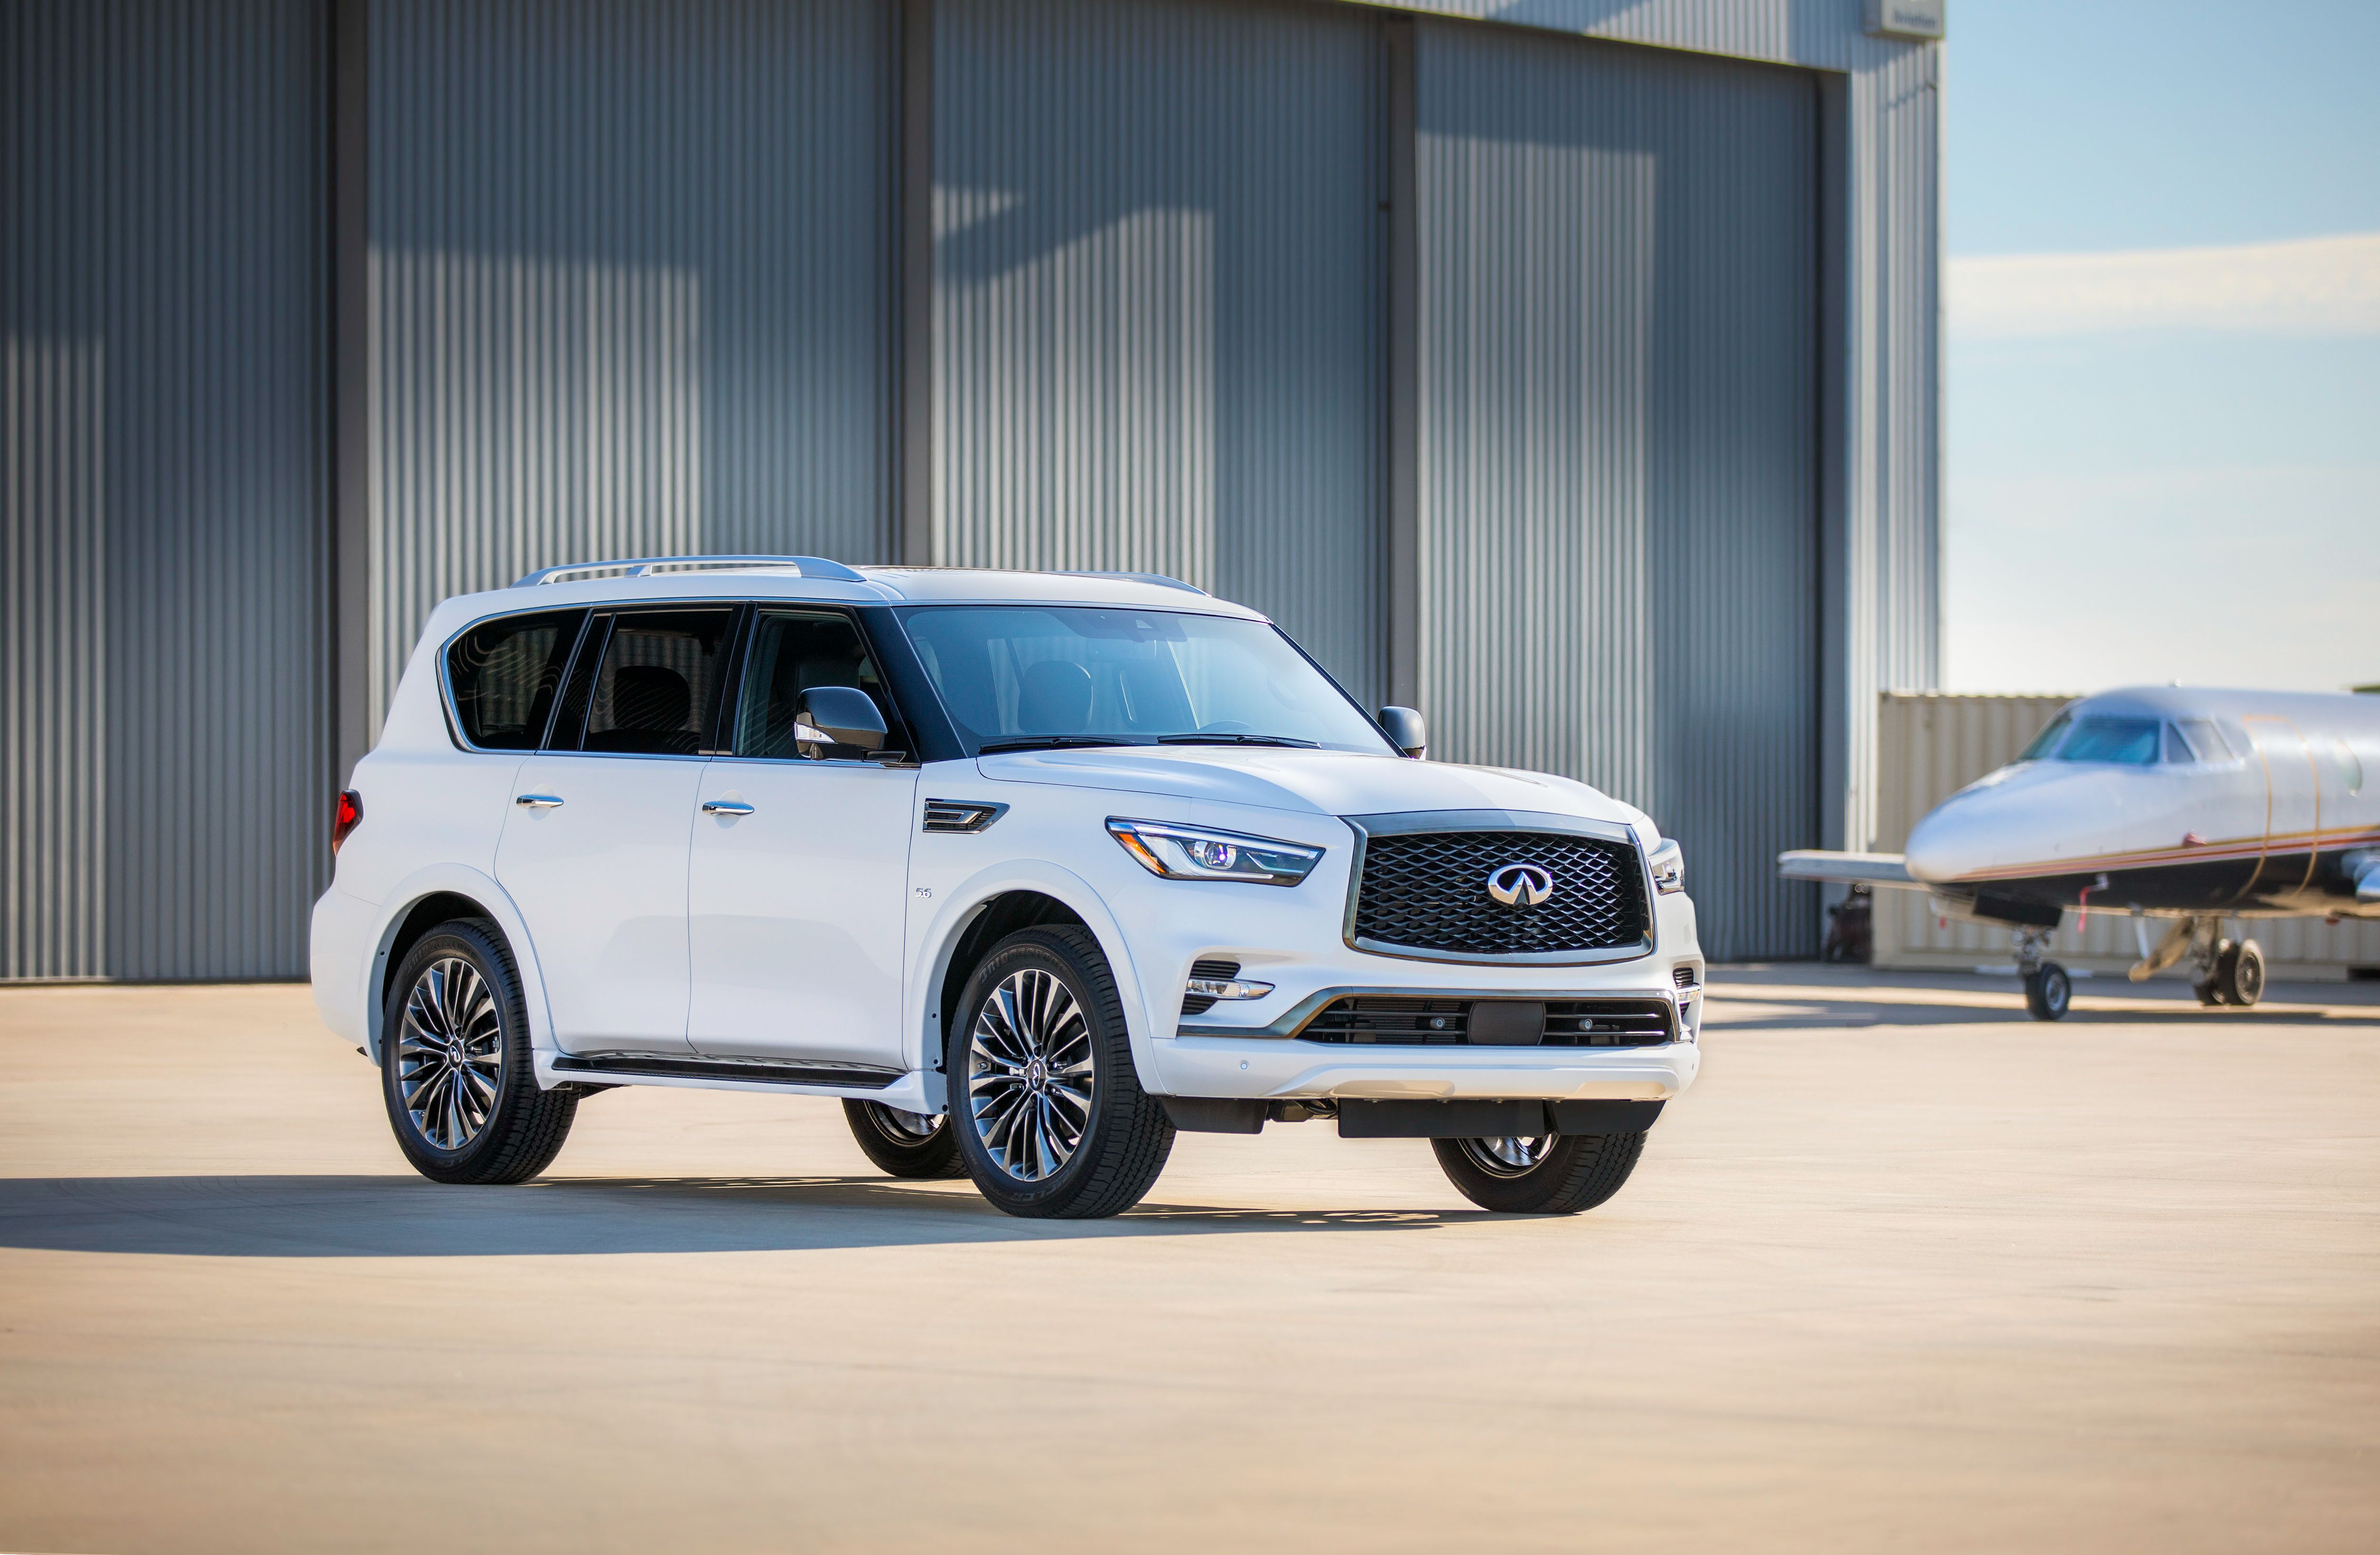 2020 Infiniti Qx80 Review Pricing And Specs